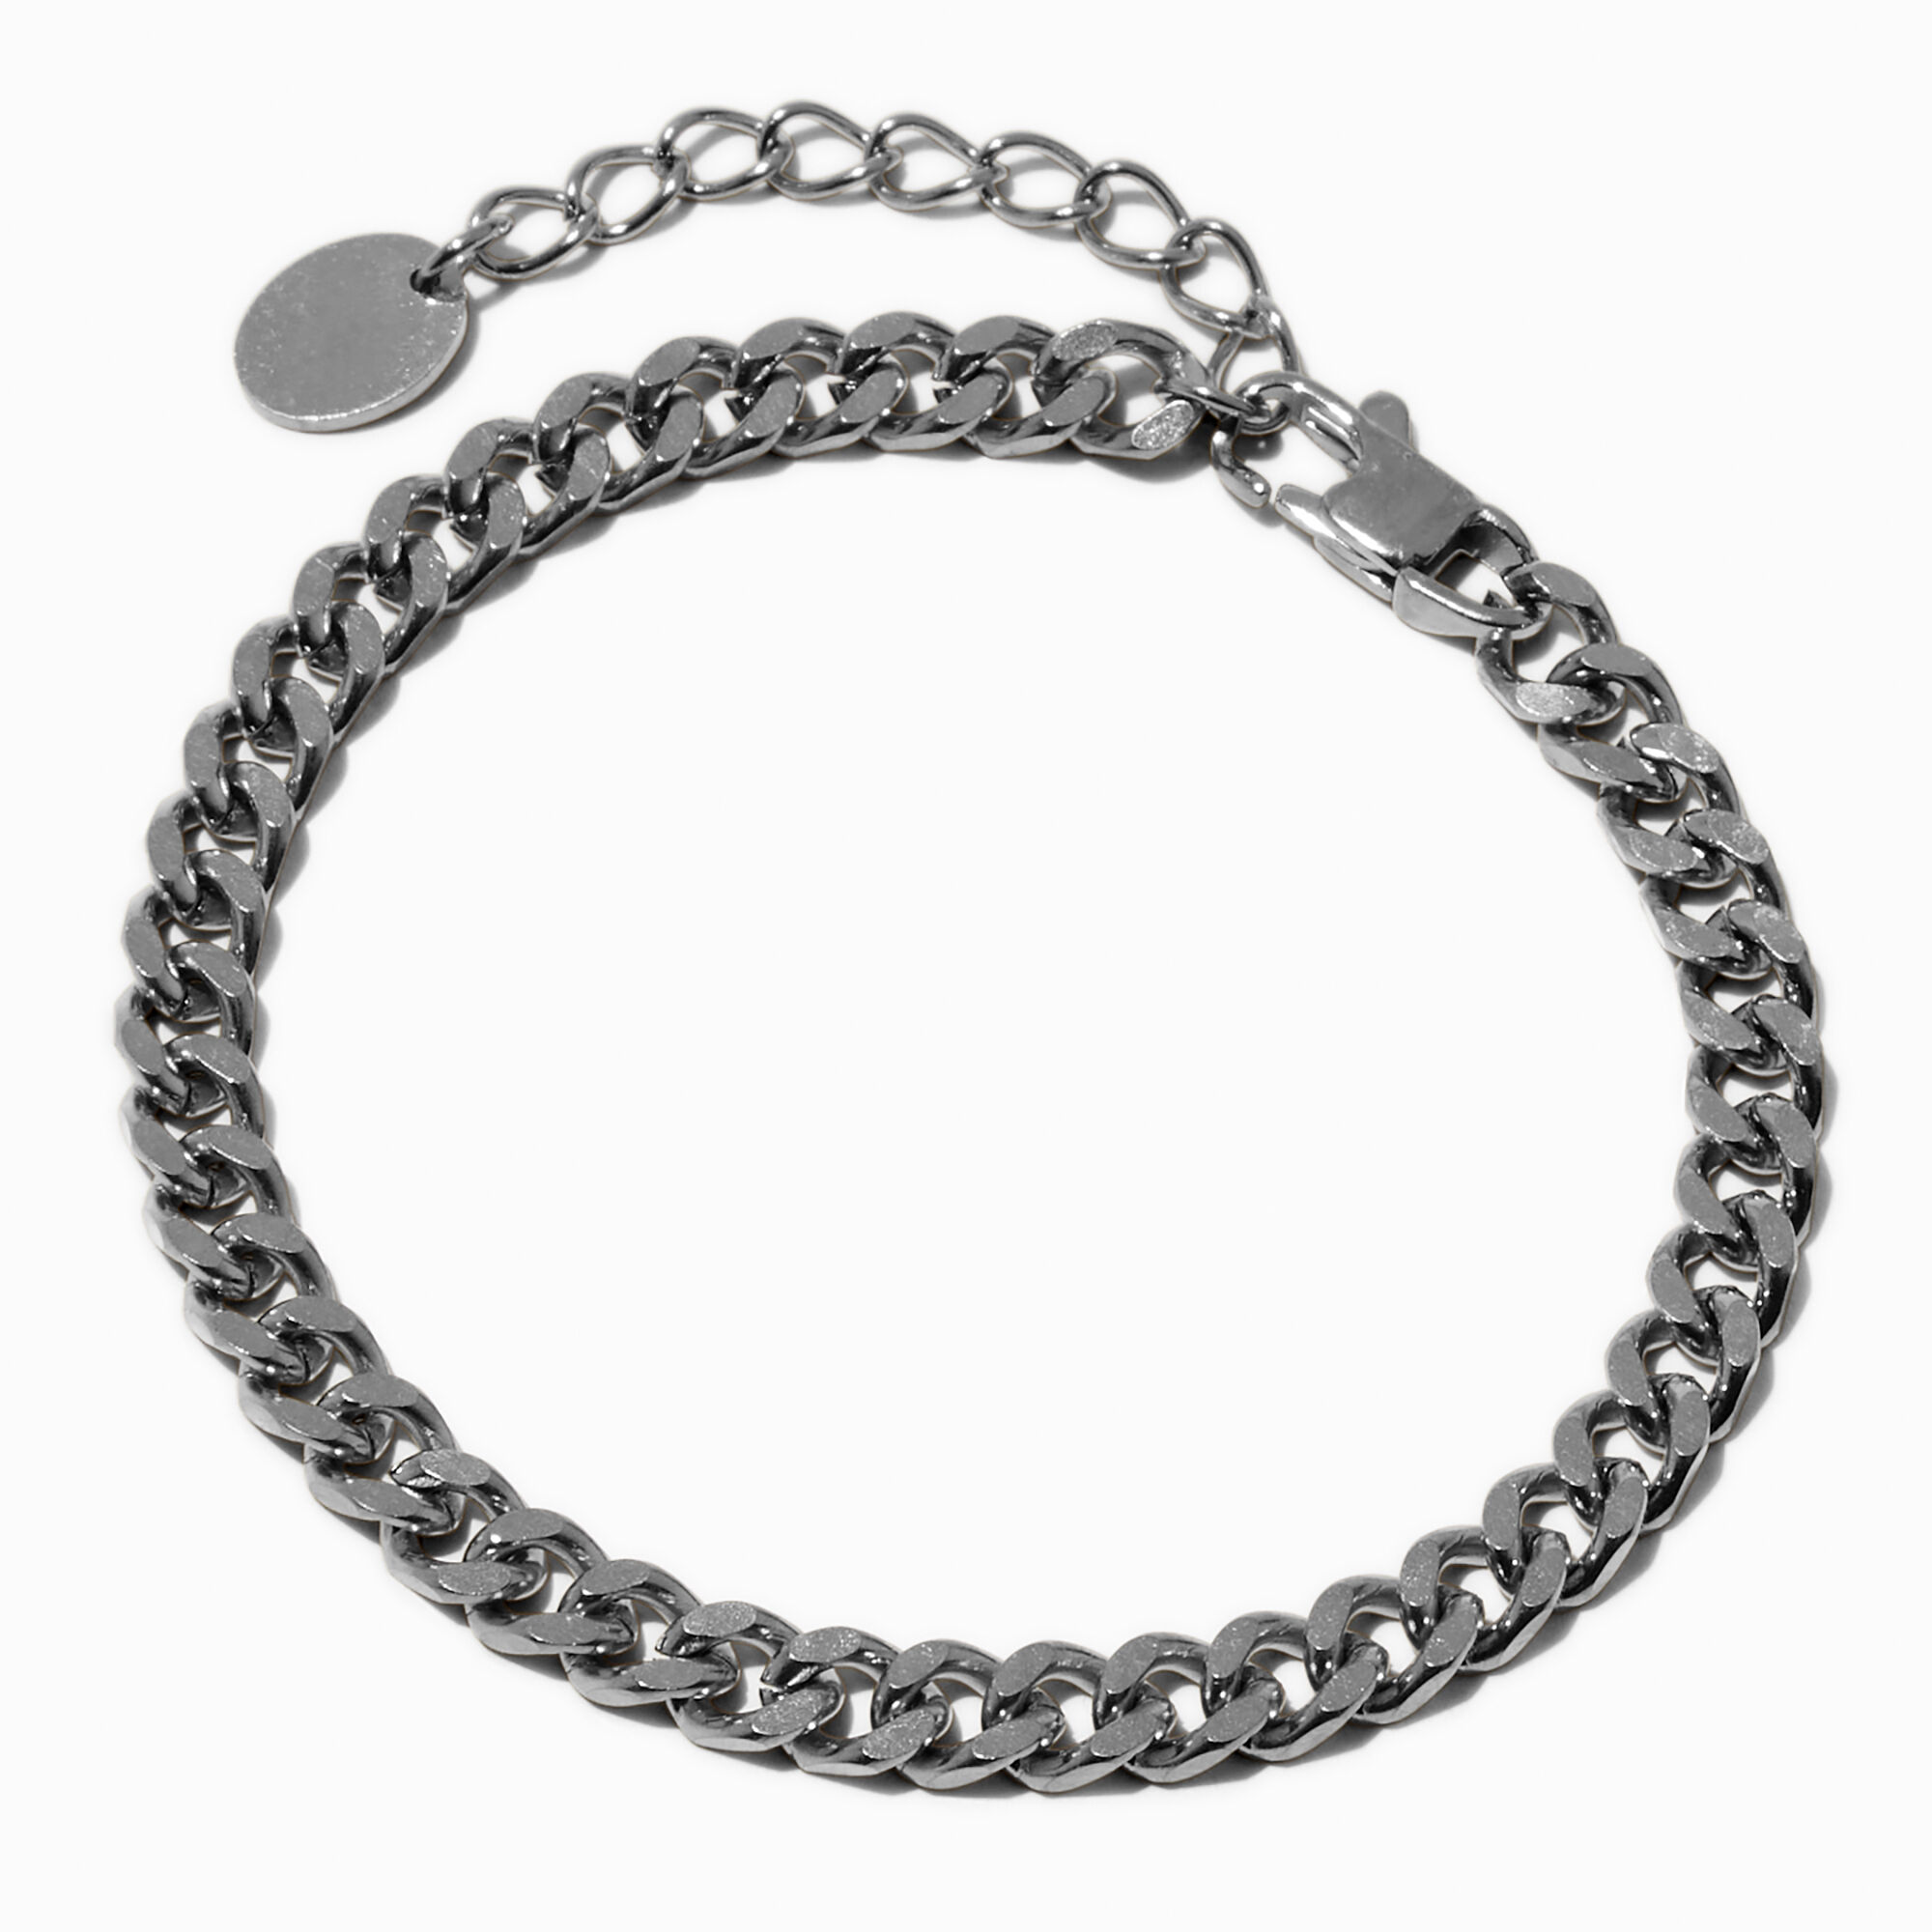 View Claires Tone Stainless Steel 6MM Curb Chain Bracelet Silver information